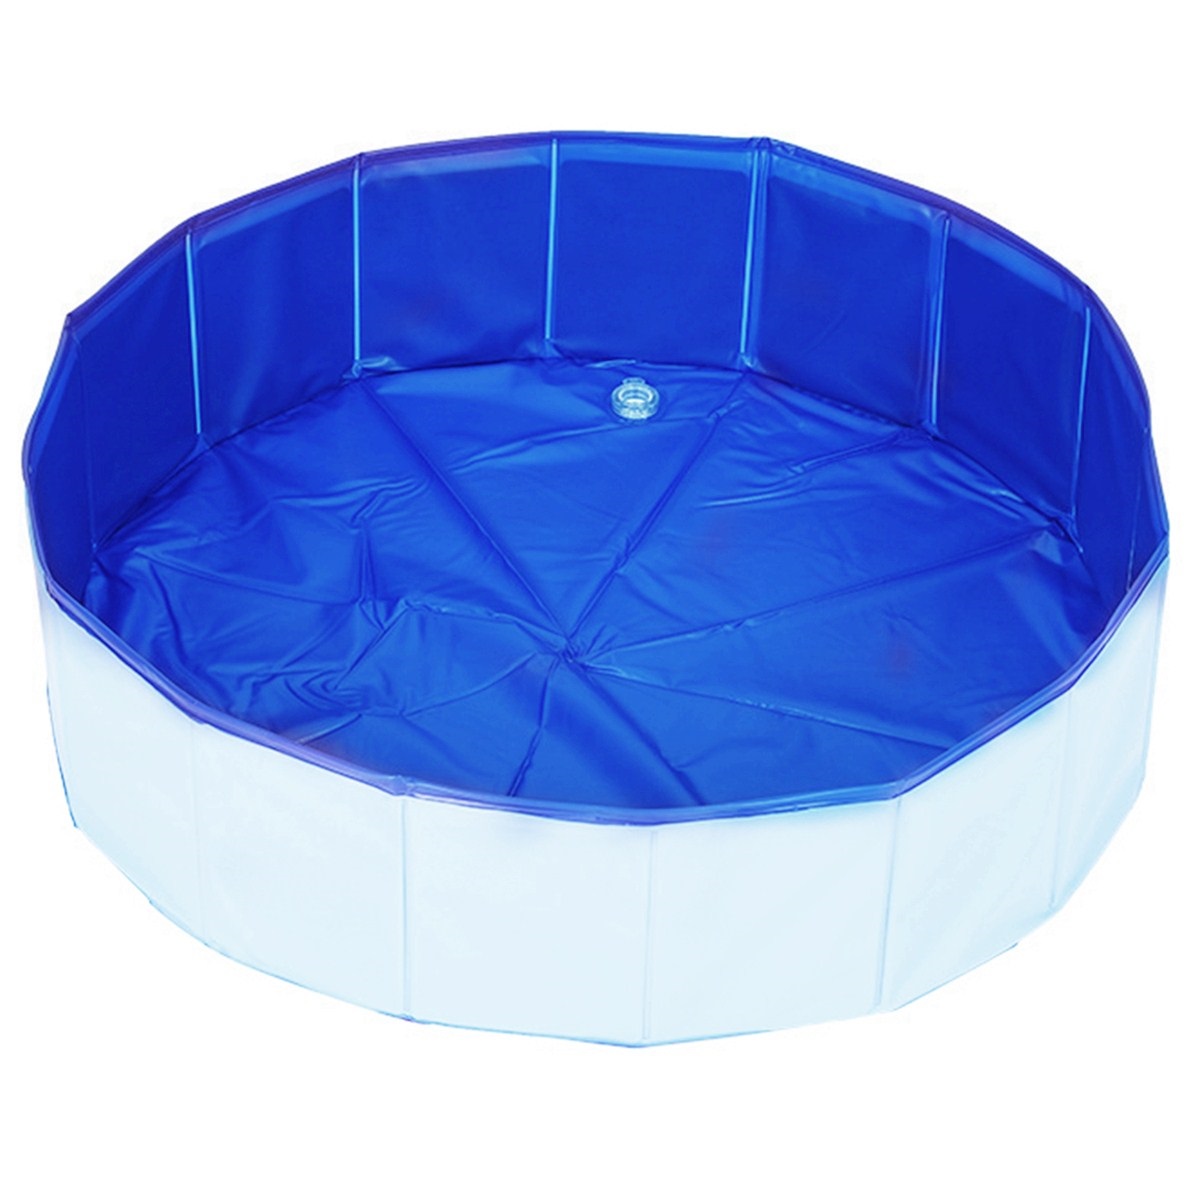 Pet-Outdoor-Swimming-Pool-Shower-Foldable-Pet-Swimming-Pool-Easy-Carry-Dog-Cat-Pet-Shower-Swimming-P-1759068-2